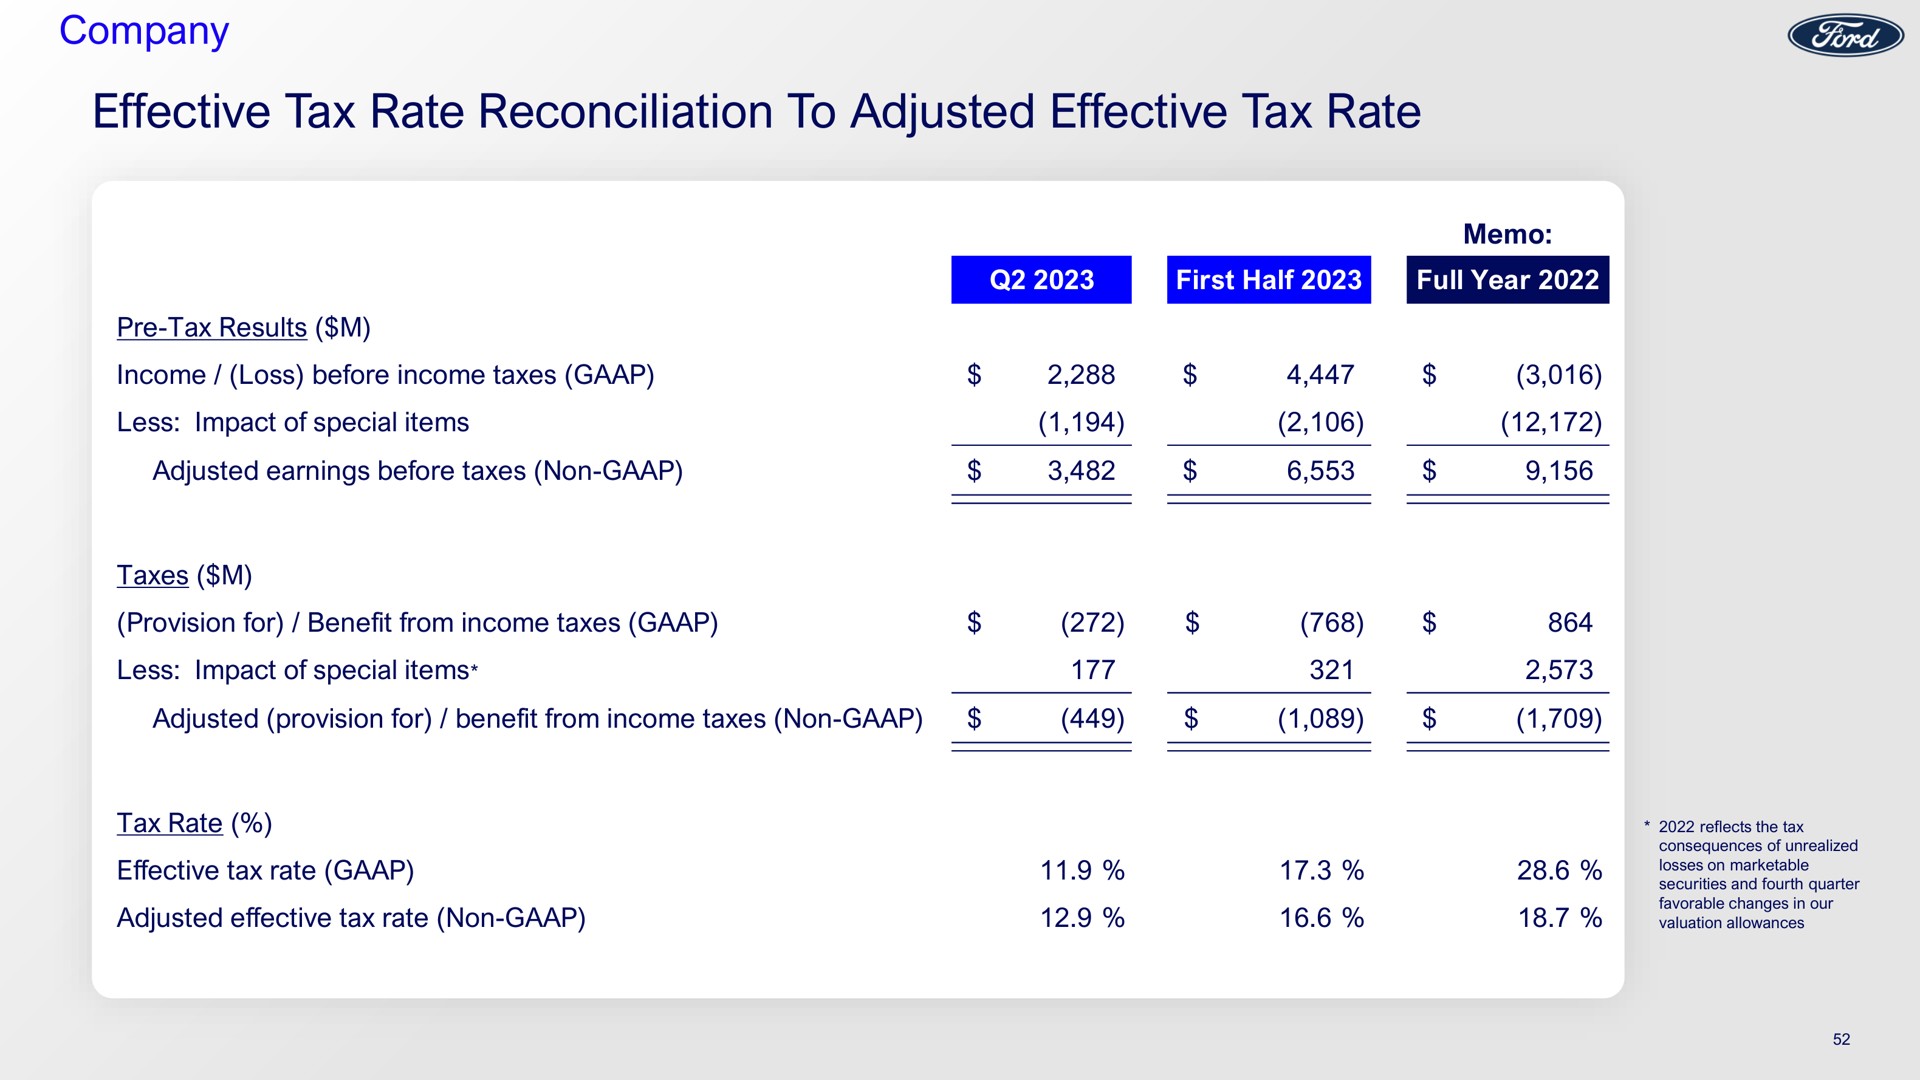 company effective tax rate reconciliation to adjusted effective tax rate | Ford